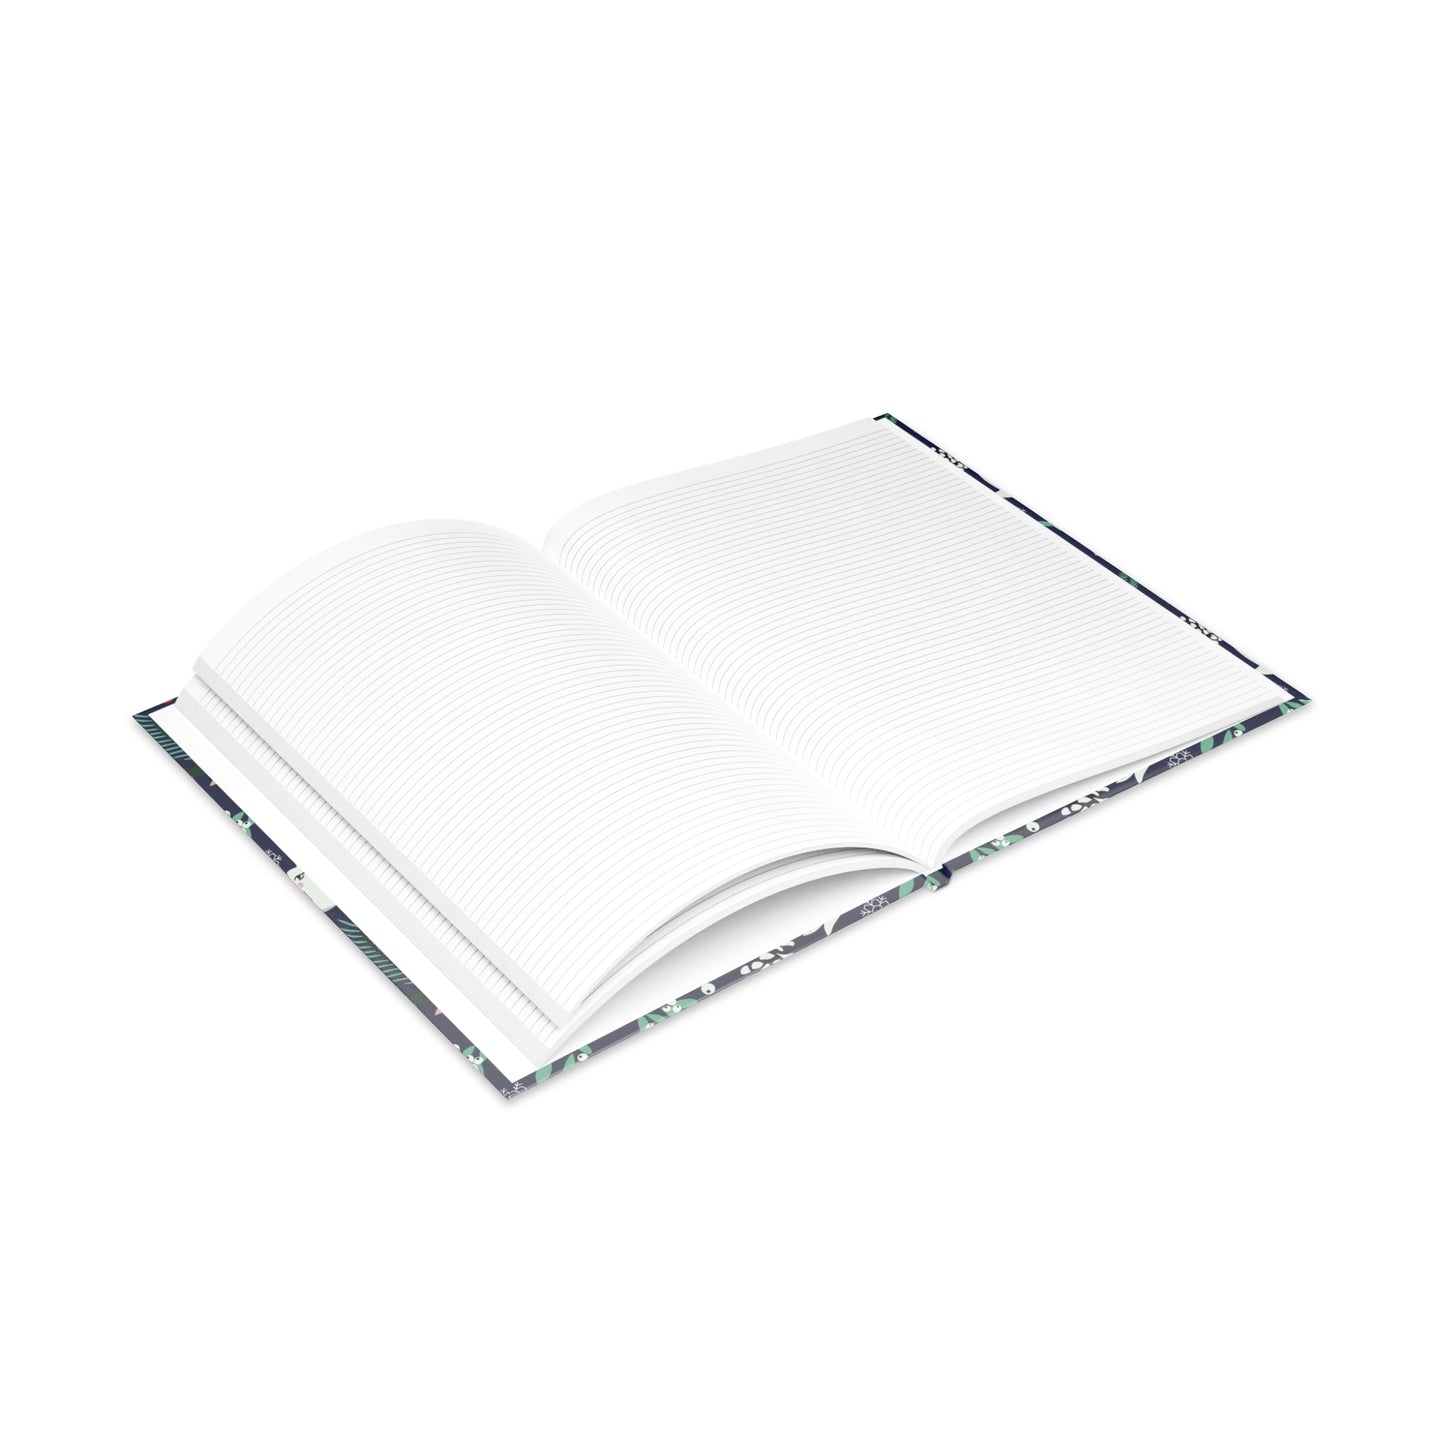 Hardcover Notebook with Puffy Covers - Metsäjanis / Polar Bunny